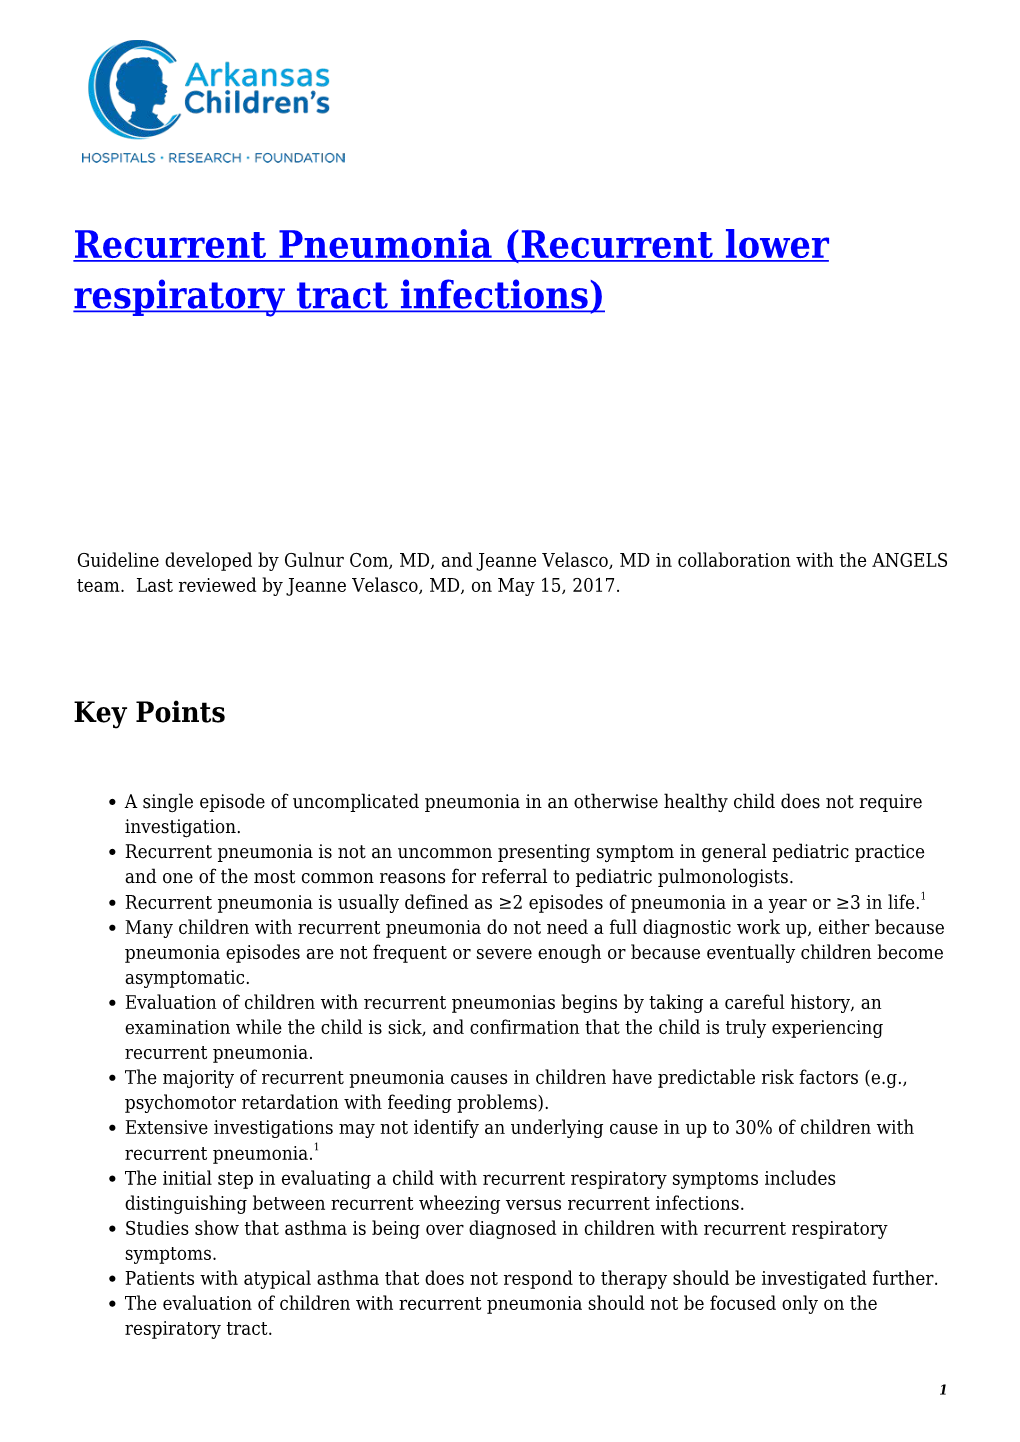 Recurrent Pneumonia (Recurrent Lower Respiratory Tract Infections)